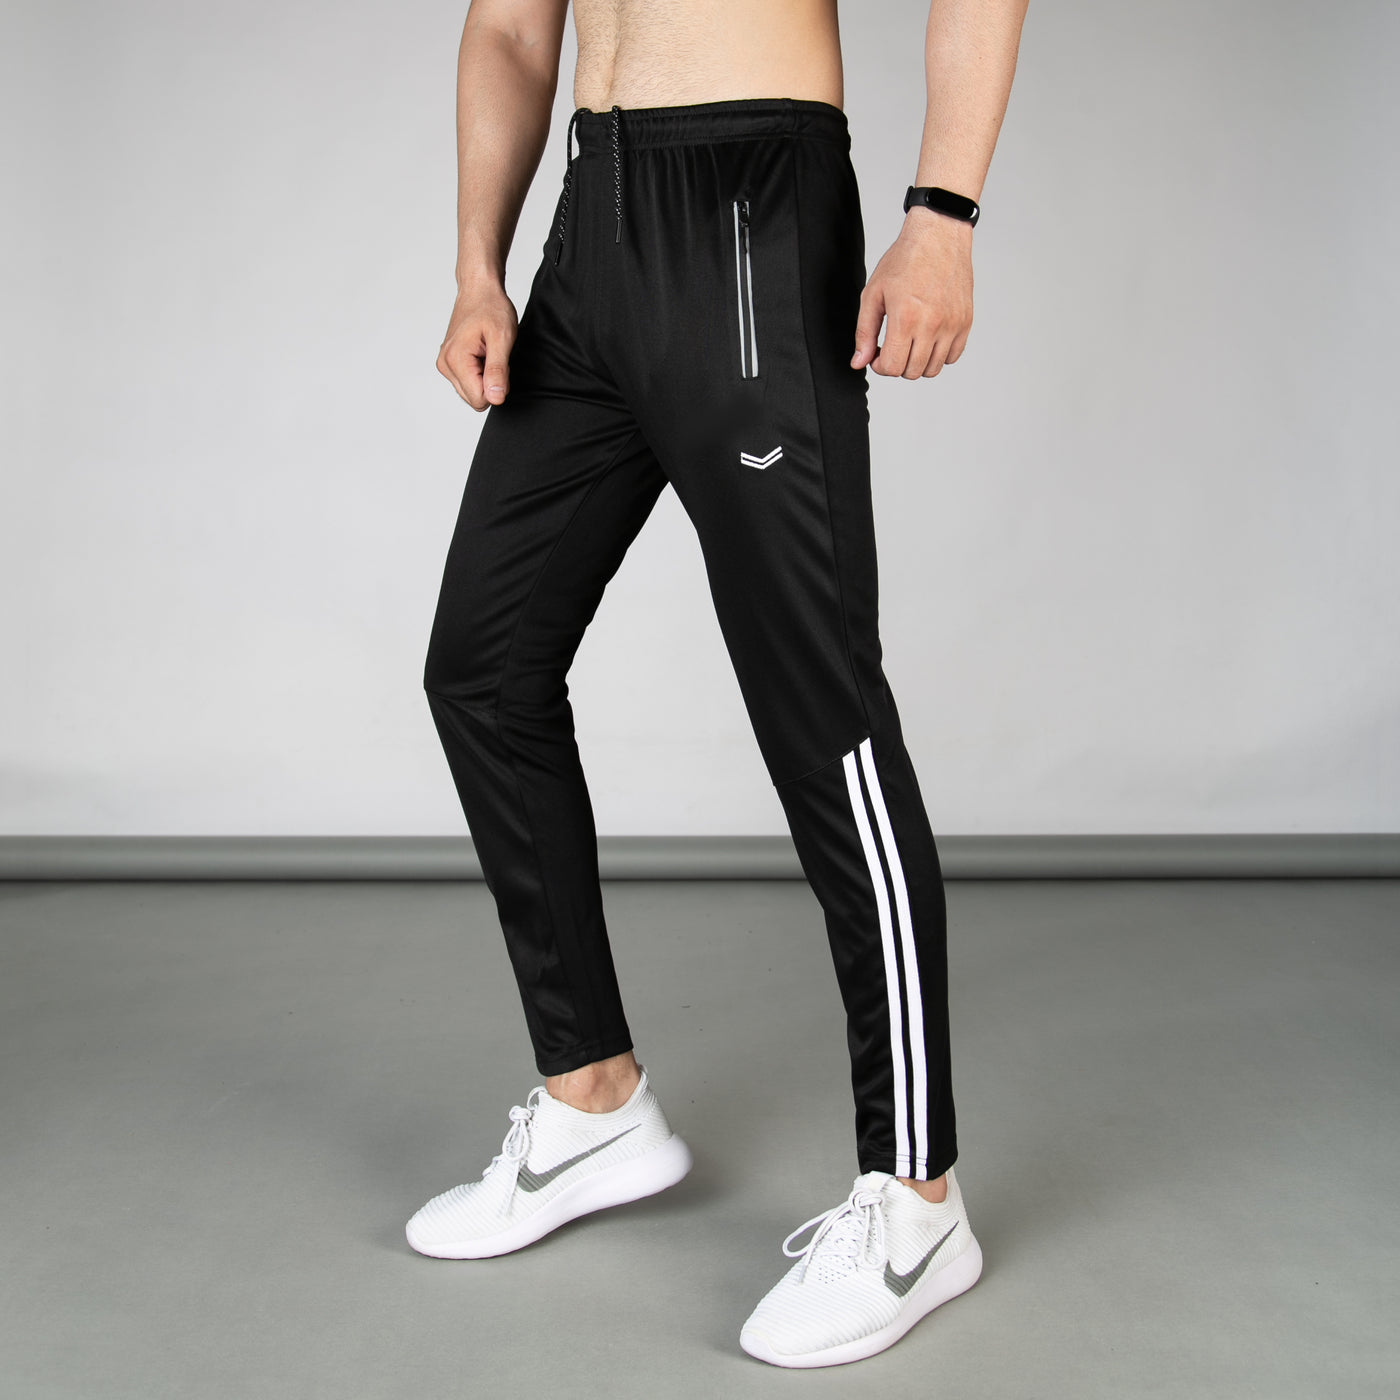 Black Quick Dry Bottoms with Two Bottom Stripes & Reflective Zips